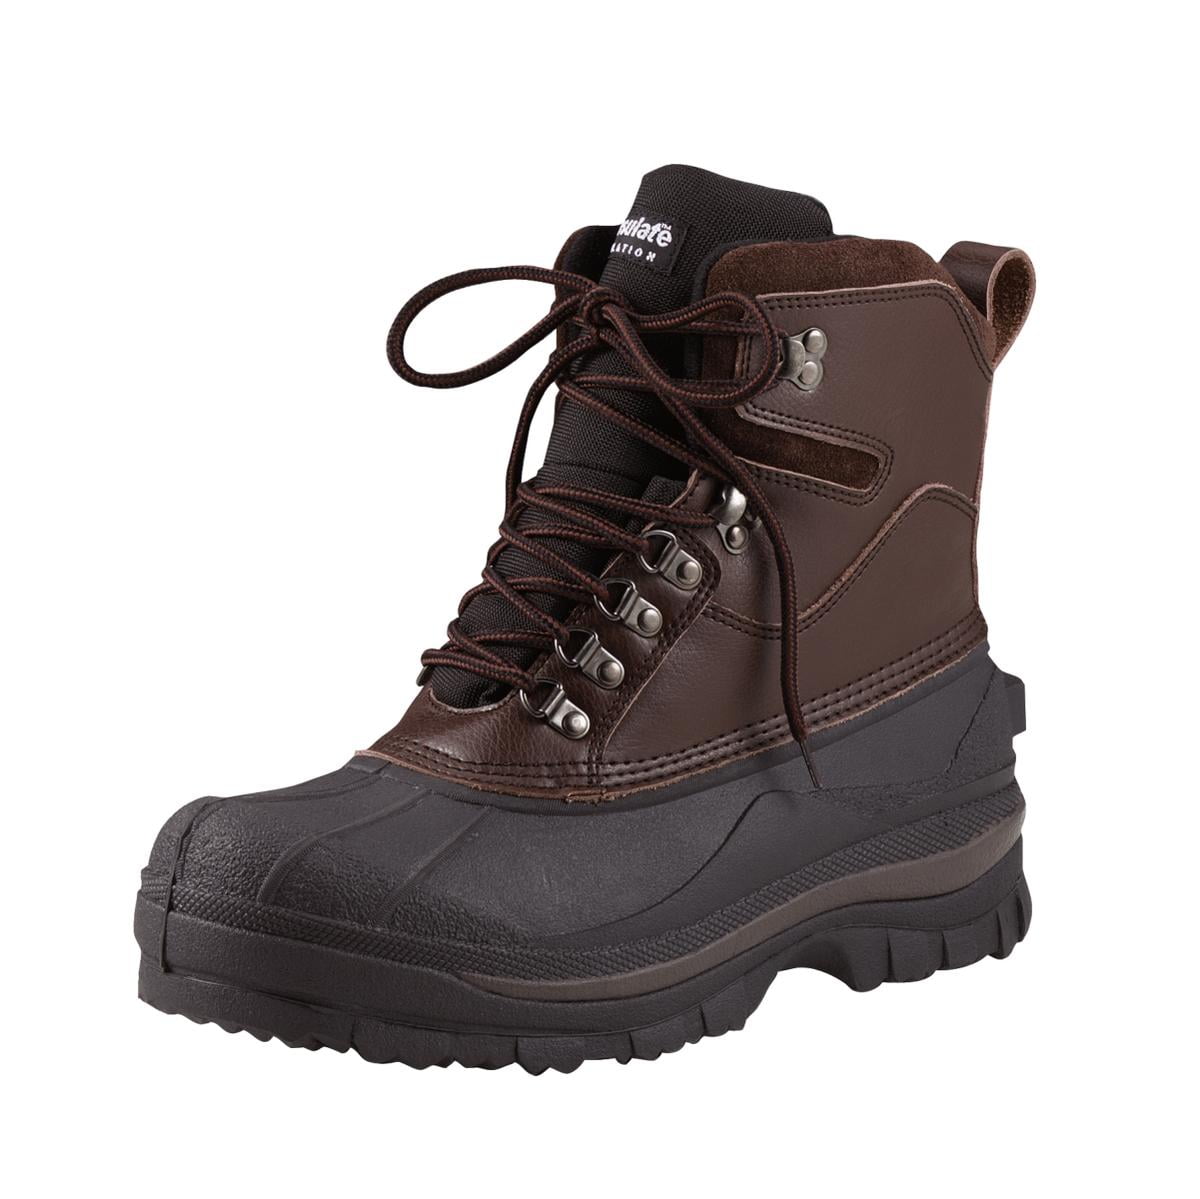 Rothco Thinsulate-lined Weather Winter PAC Boot, -